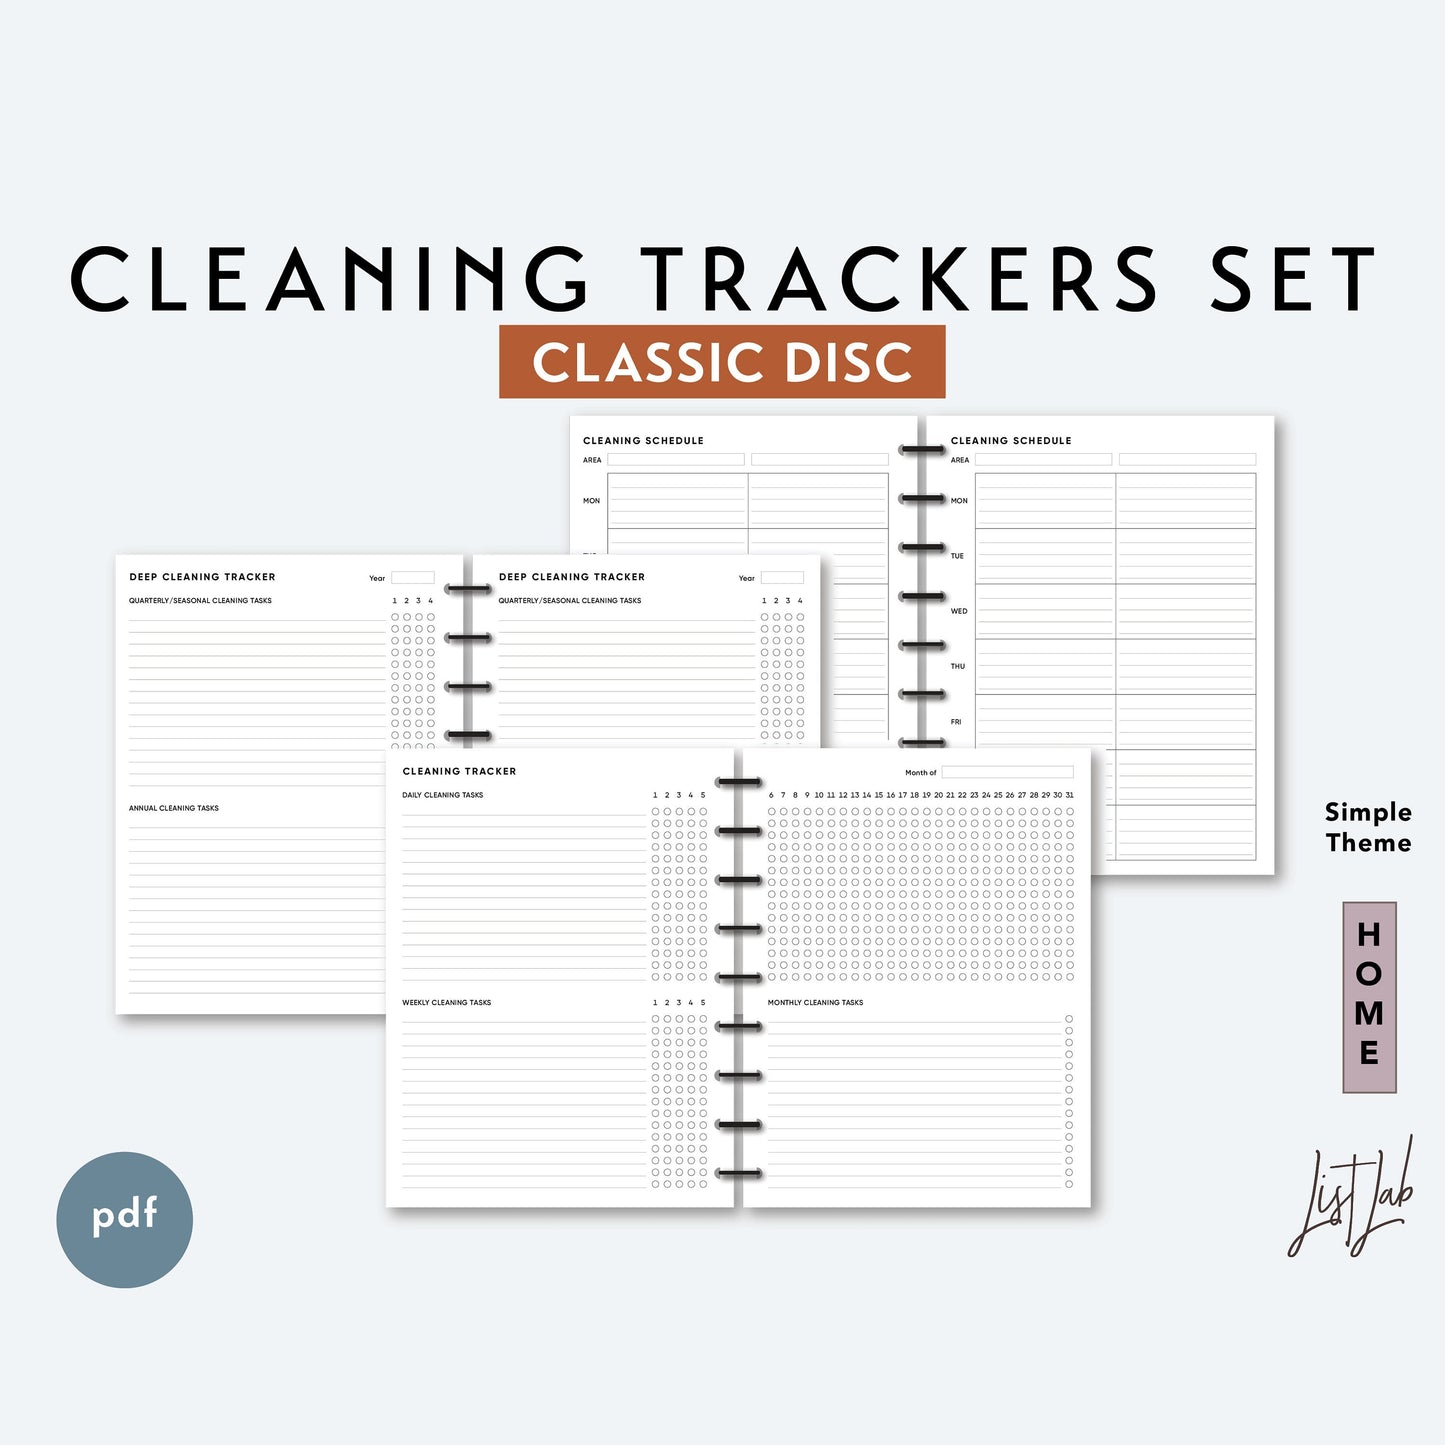 Classic Discbound CLEANING TRACKERS Printable Insert Set